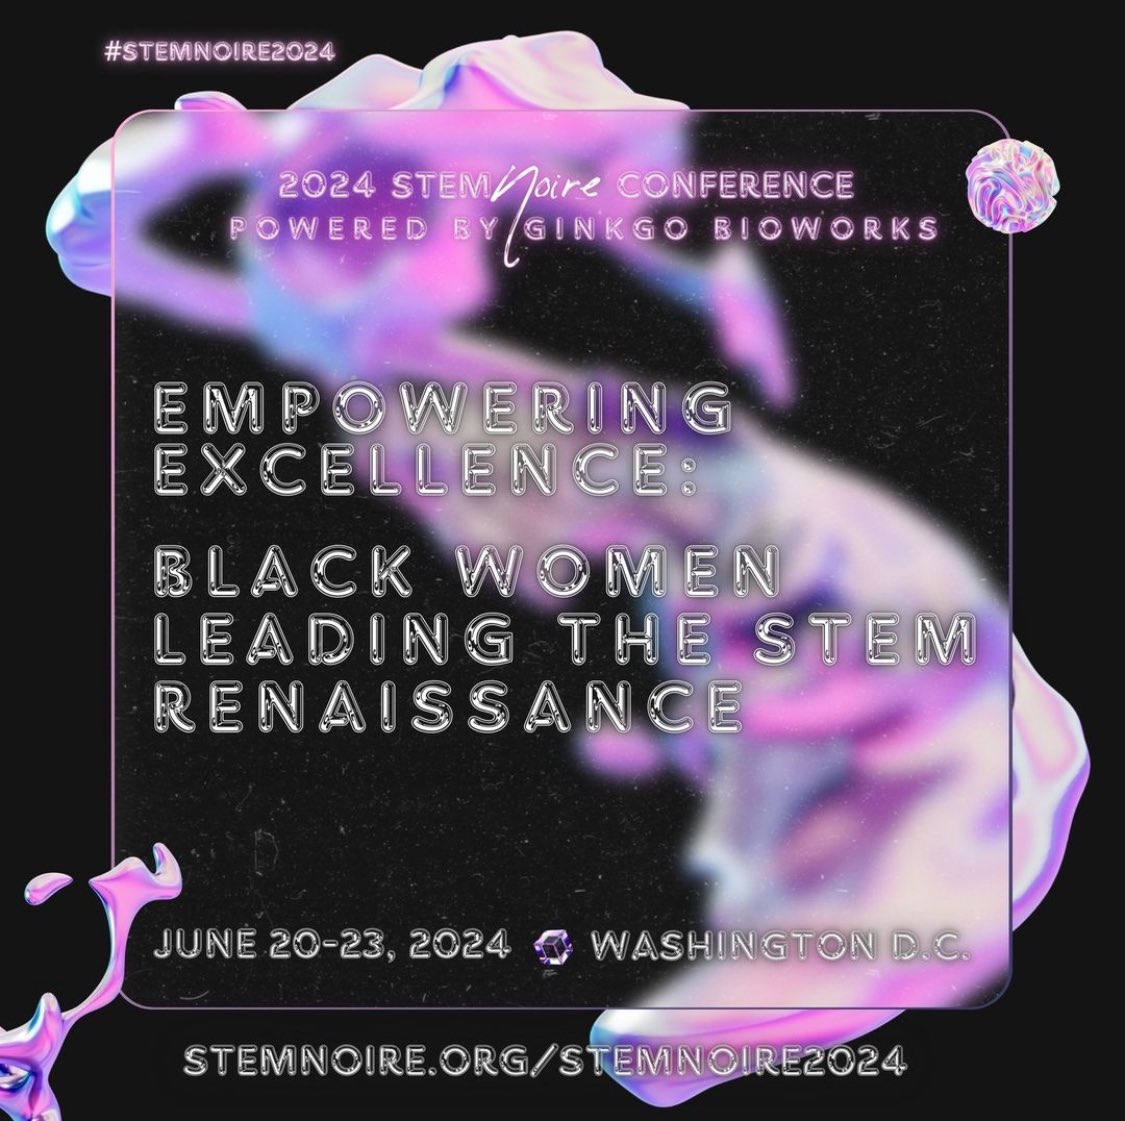 Hey DC! @STEMNoire is inviting our community to join them at their opening reception on June 20, 2024 here in DC. They are extending a $𝟏𝟎 𝐝𝐢𝐬𝐜𝐨𝐮𝐧𝐭 to the welcome reception using the code 𝐁𝐋𝐀𝐂𝐊𝐈𝐍𝐗. Registration is open until June 19, 2024 stemnoire.org